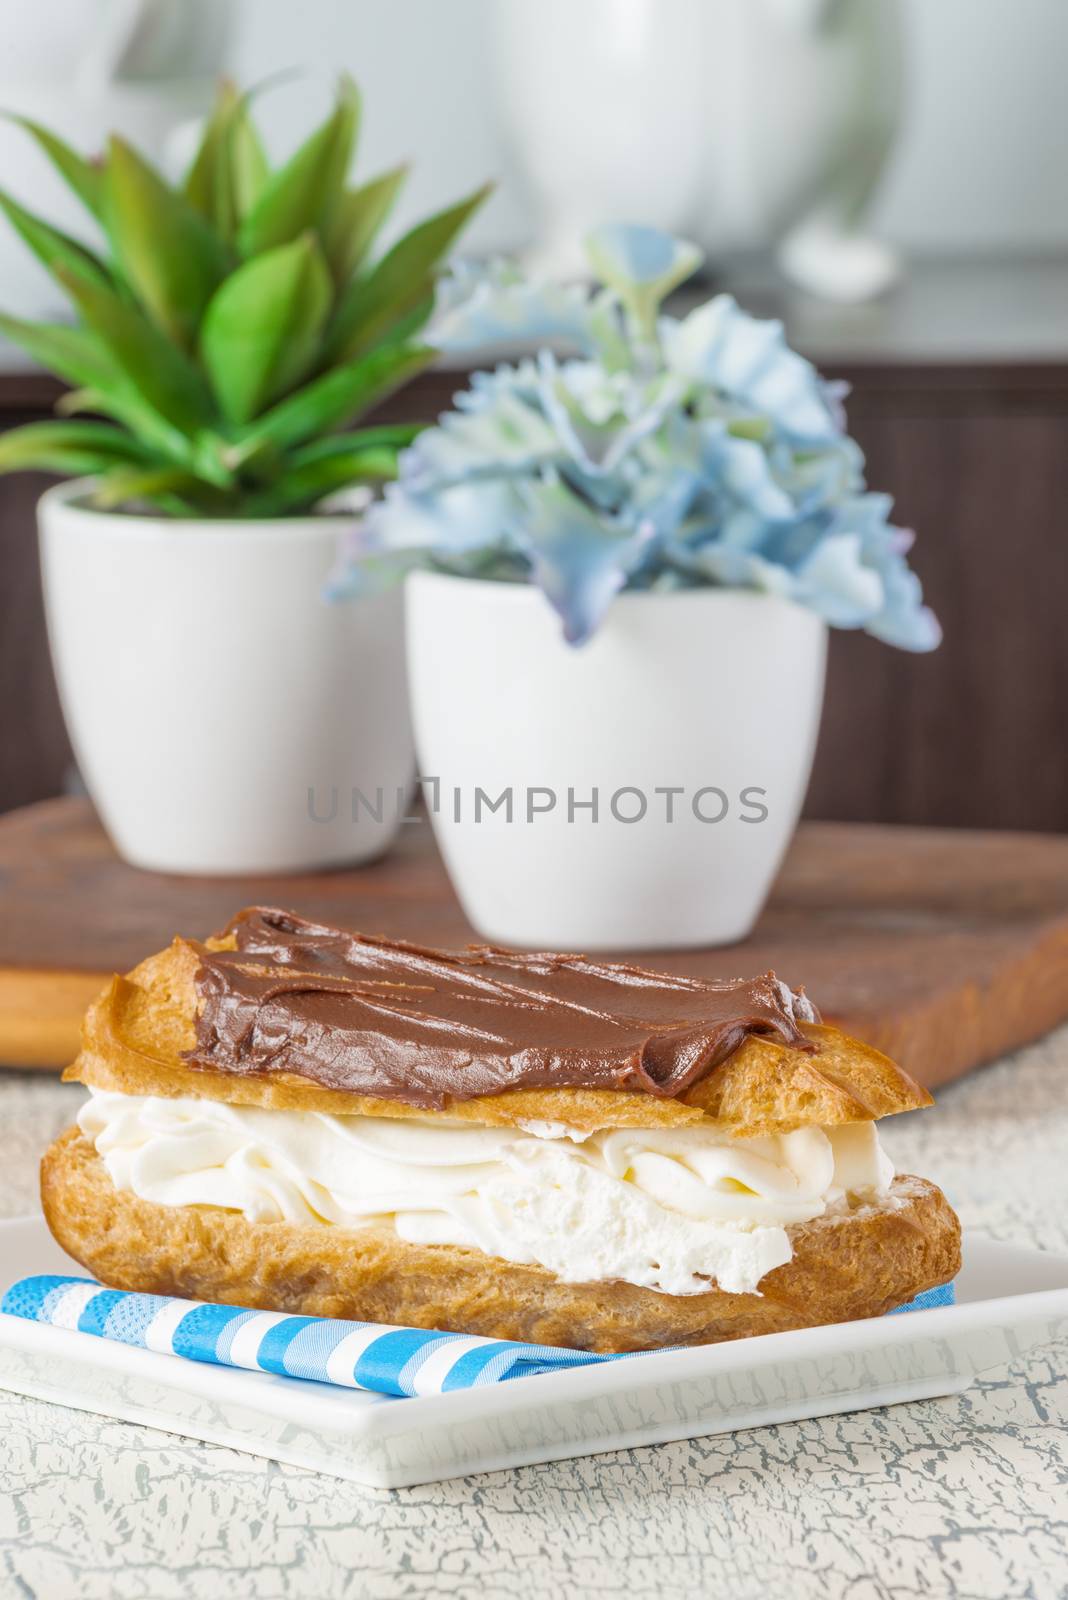 Closeup view of a delicious chocolate eclair with fresh whipped cream.